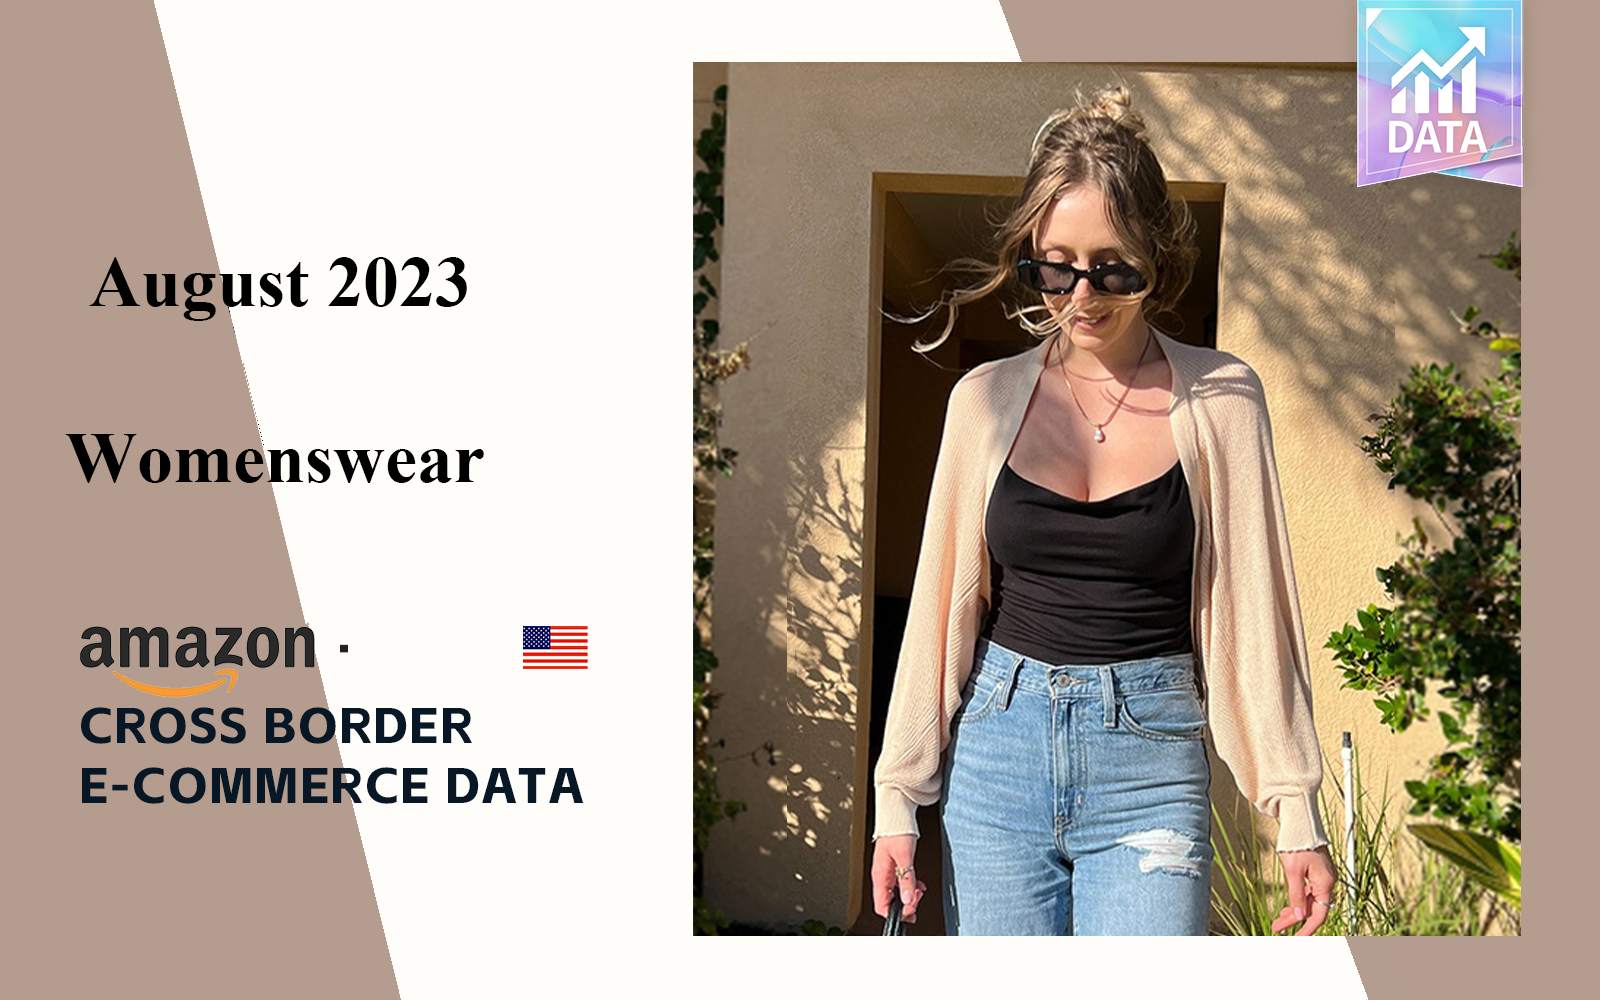 The Data Analysis of Cross-border Womenswear E-commerce in August